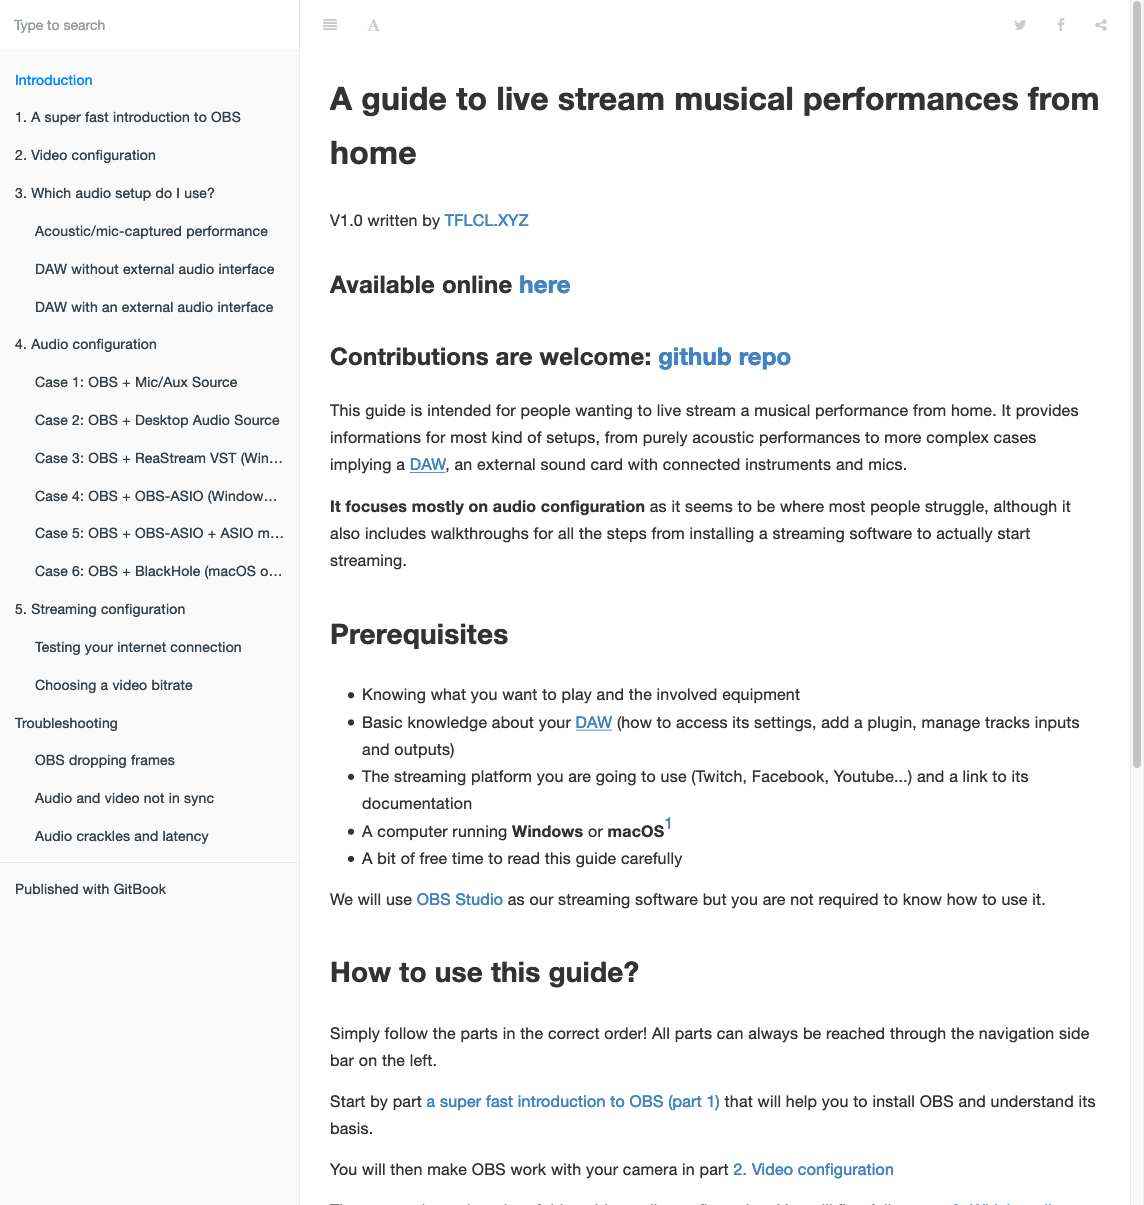 A guide about live streaming musical performances from home